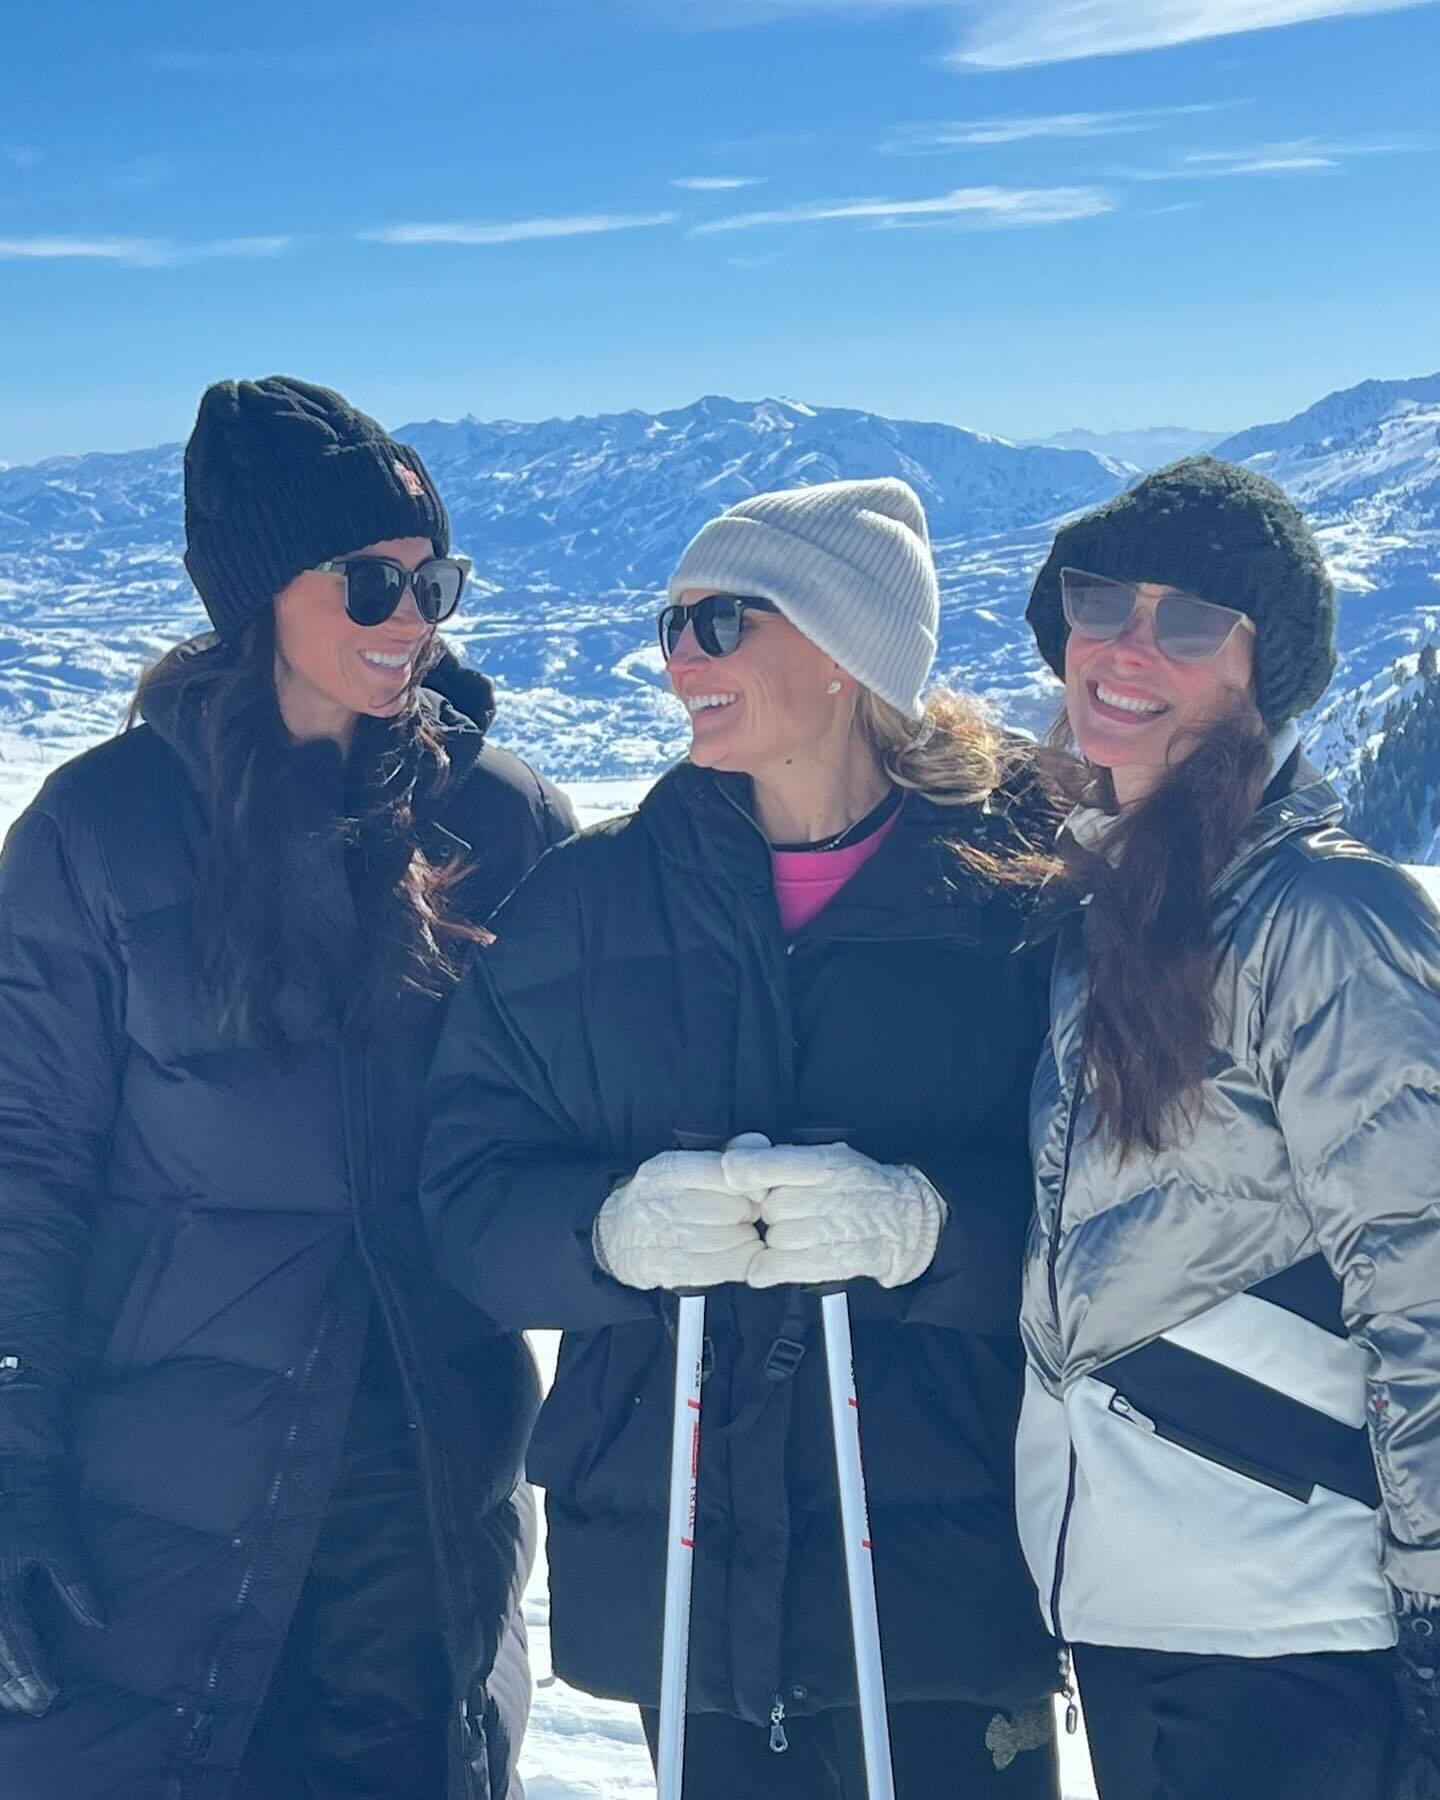 Meghan Markle was photographed in the mountains with two friends without Prince Harry. Photo